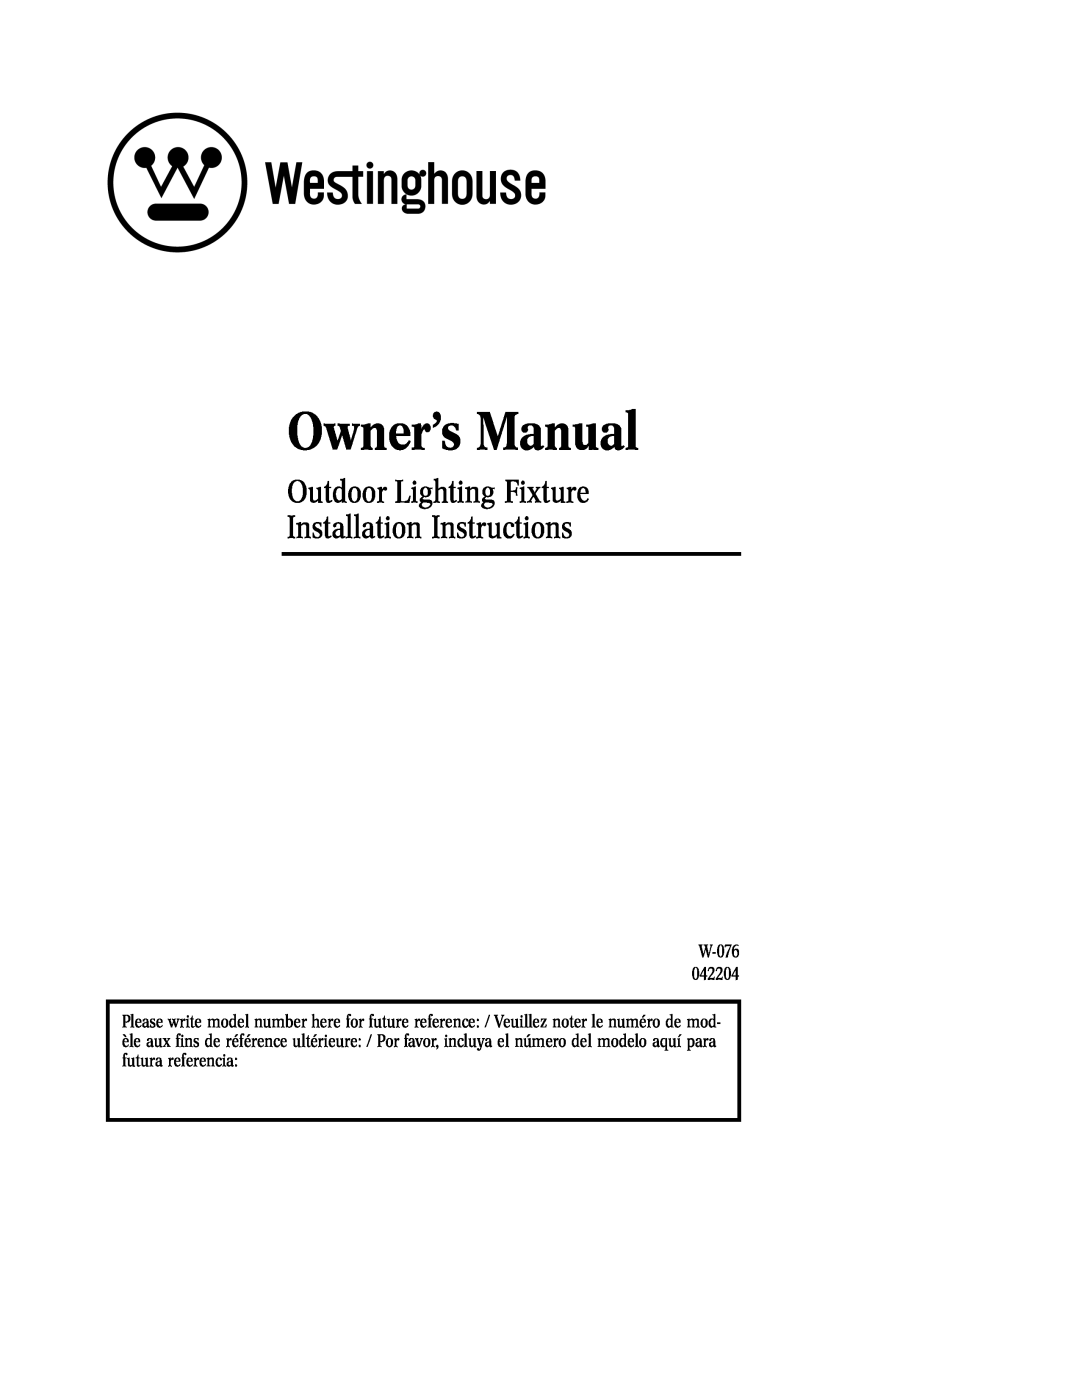 Westinghouse 42204, W-076 owner manual Outdoor Lighting Fixture, Installation Instructions 